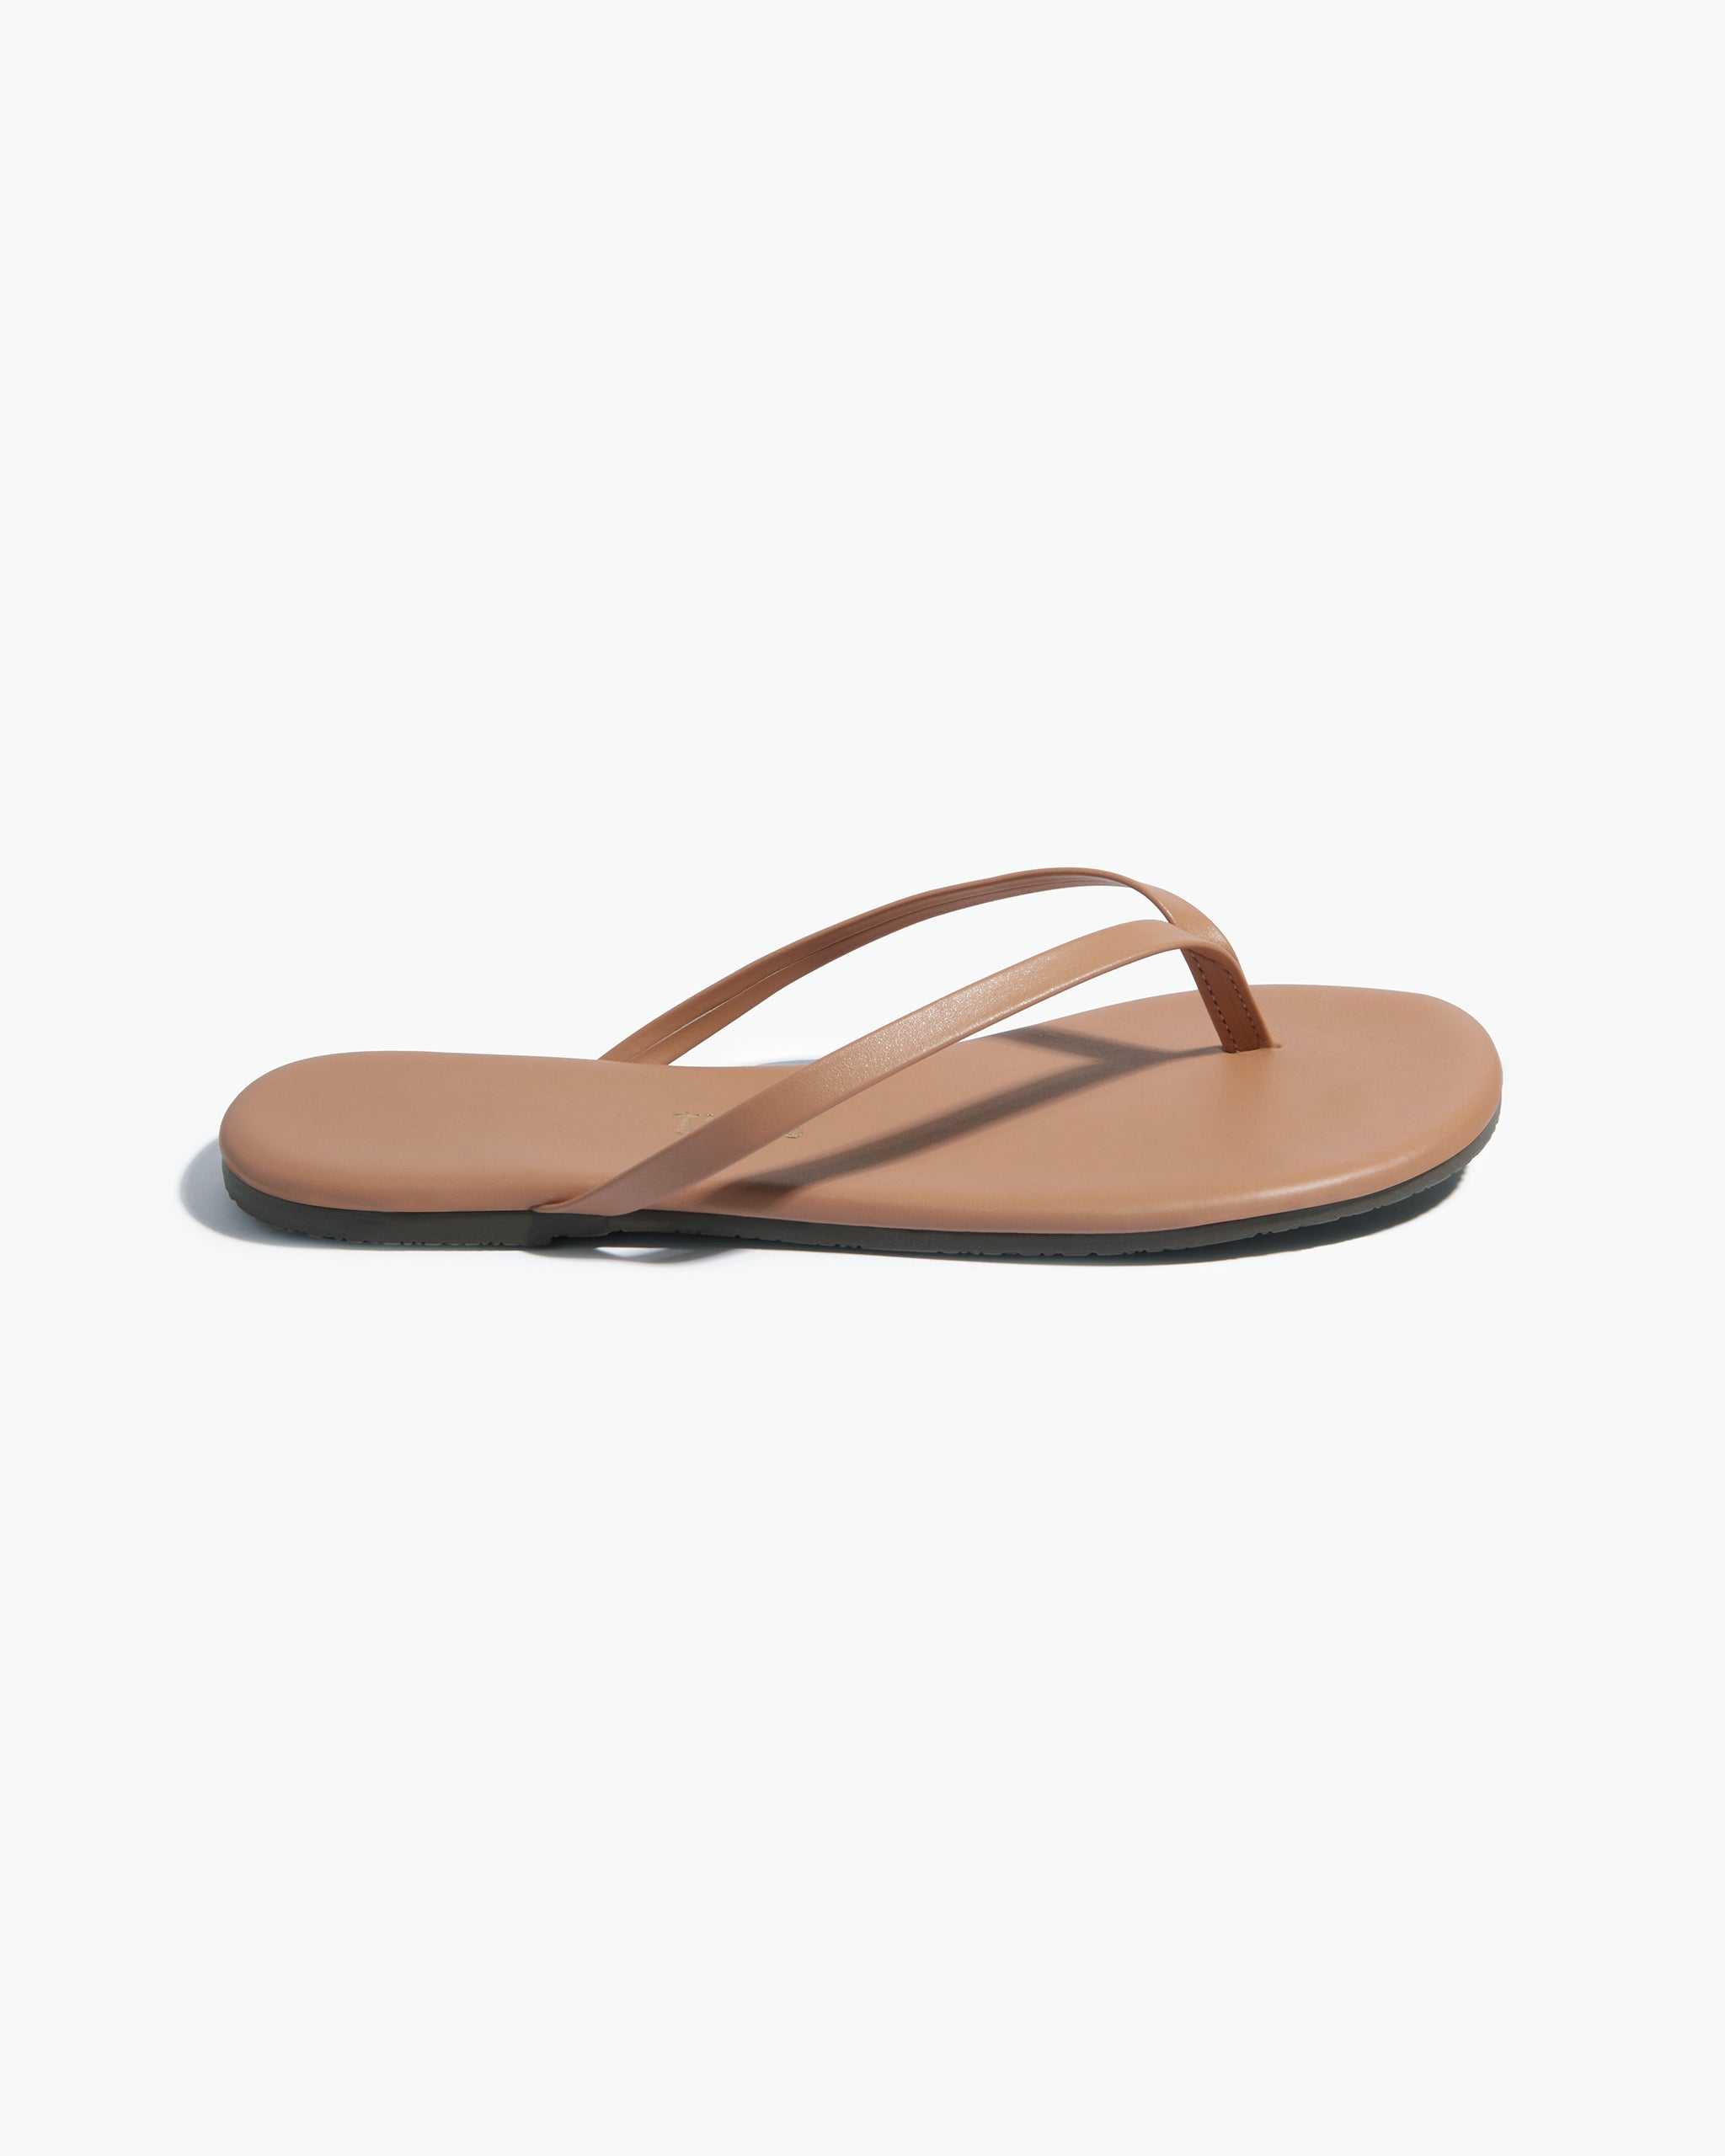 Lily Shimmers in Coocbutter | Women's Sandals | TKEES – TKEES